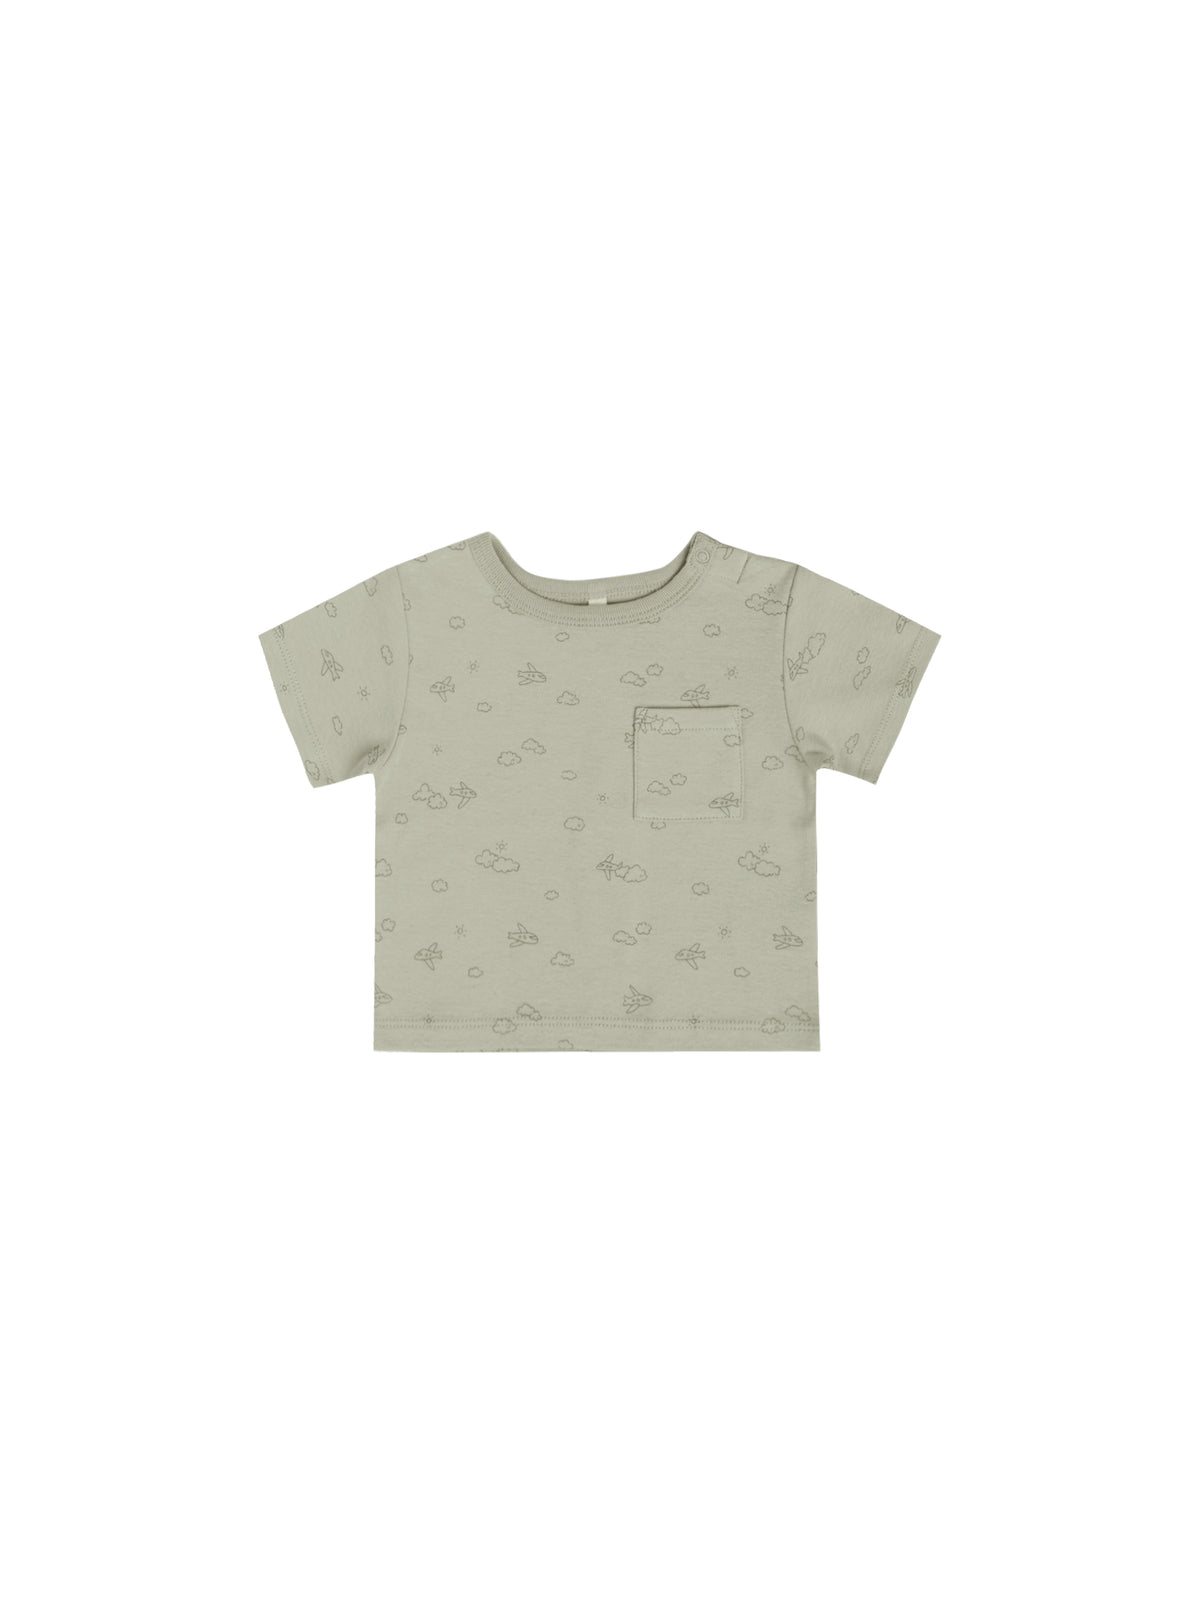 Quincy Mae | Boxy Pocket Tee | Airplanes